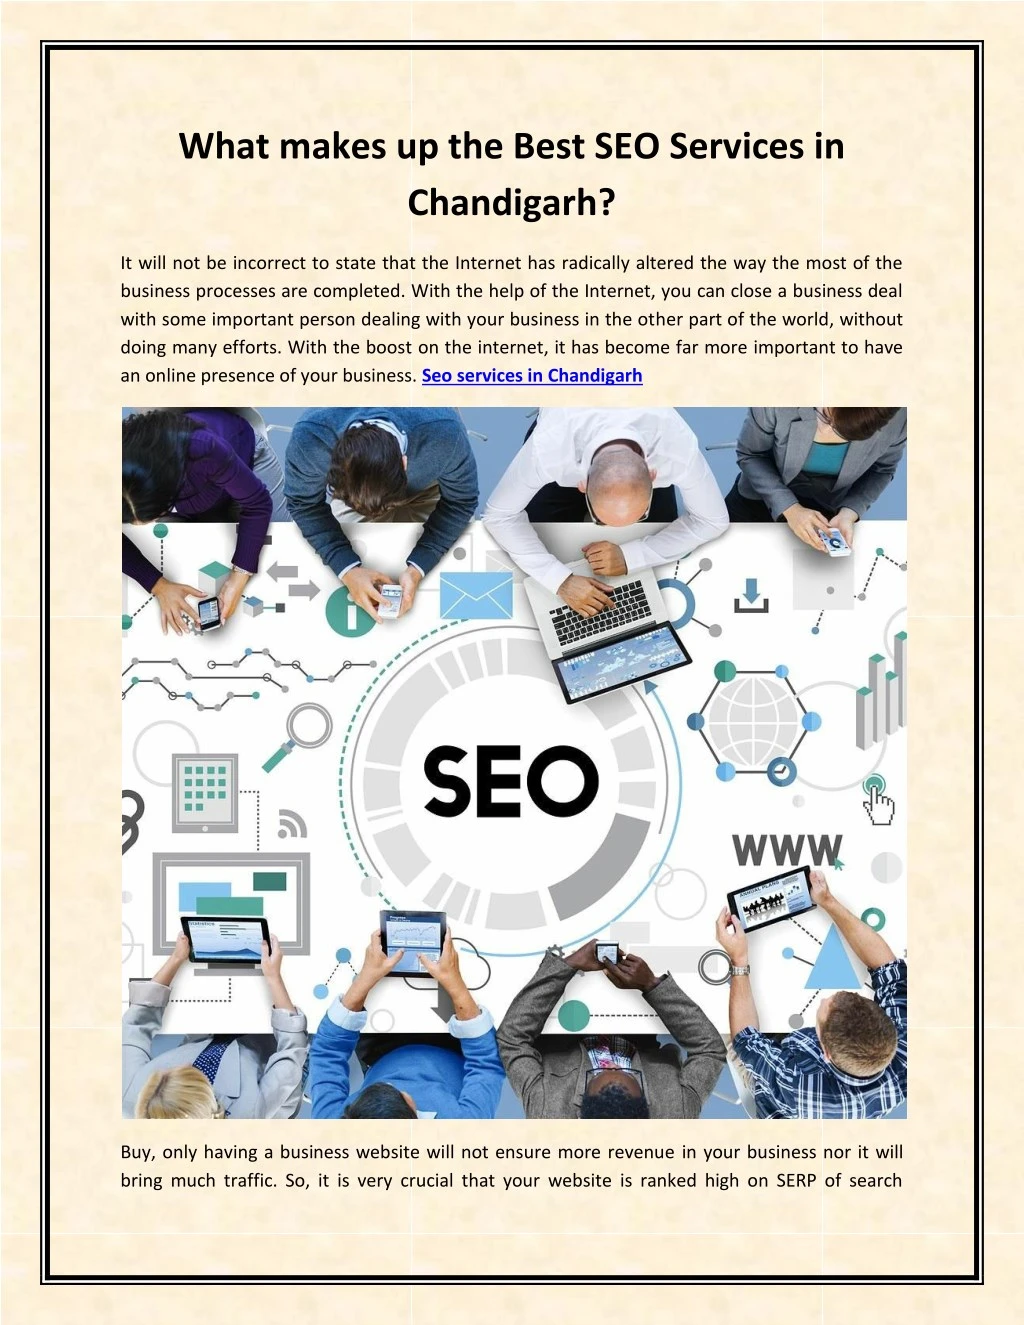 what makes up the best seo services in chandigarh